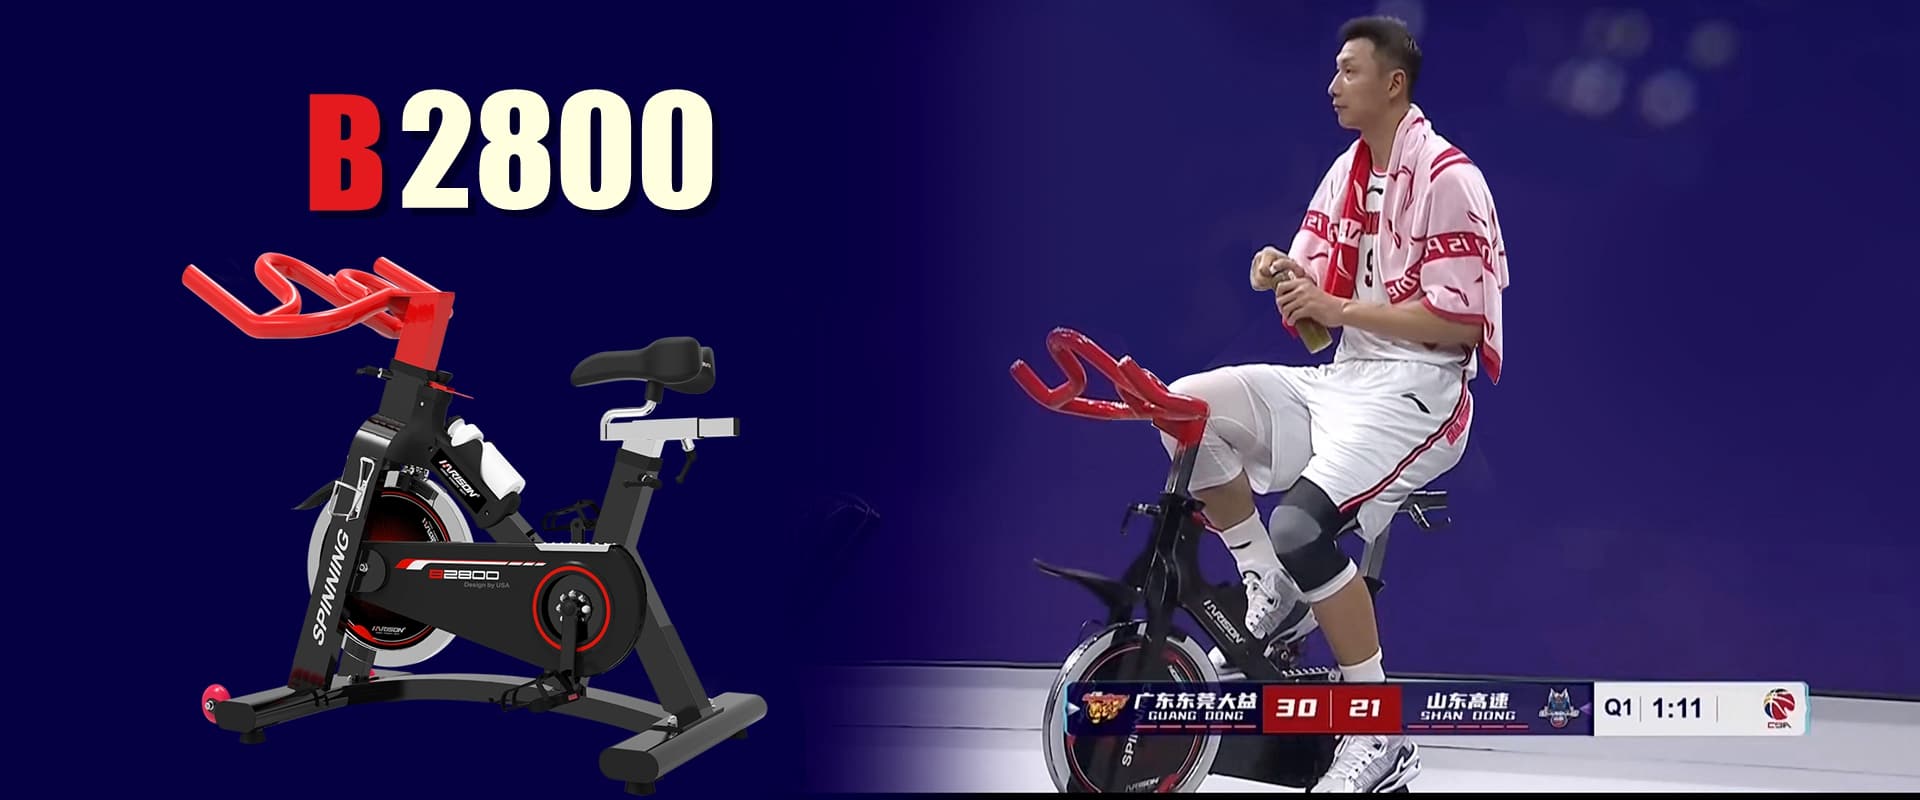 CBA Player Shows How to Avoid Stationary Bike Injuries